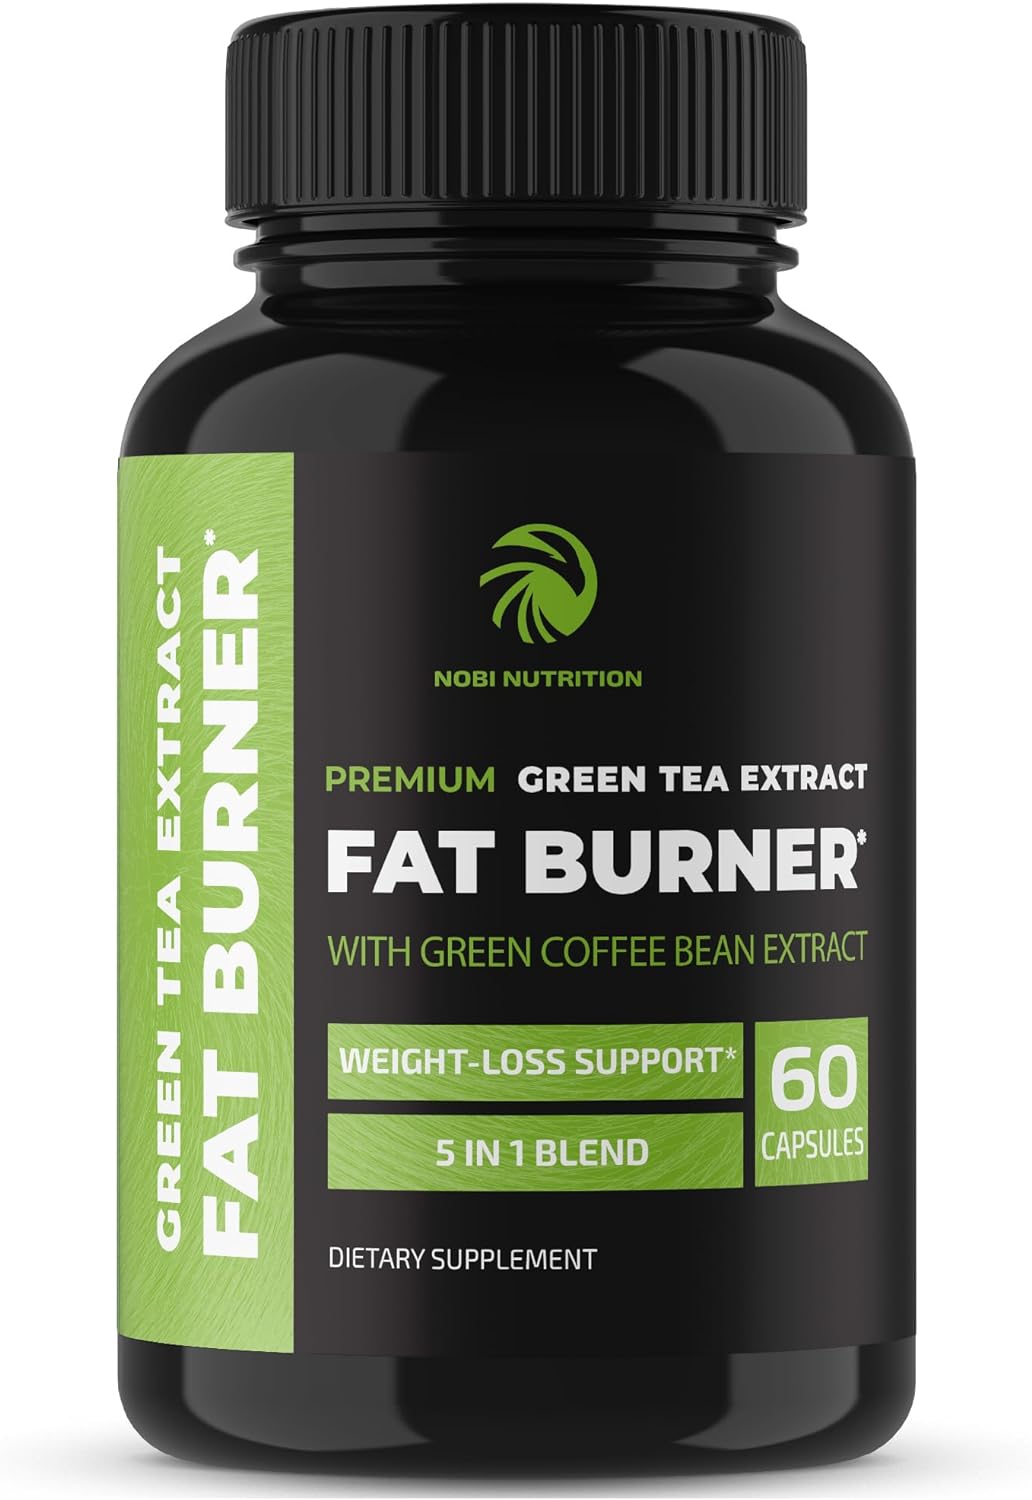 Green Tea Weight Loss Pills with Green Coffee Bean Extract | Belly Fat Burner, Metabolism Booster, Appetite Suppressant for Women Men | 45% EGCG | Vegan, Gluten-Free Supplement | 60 Capsules